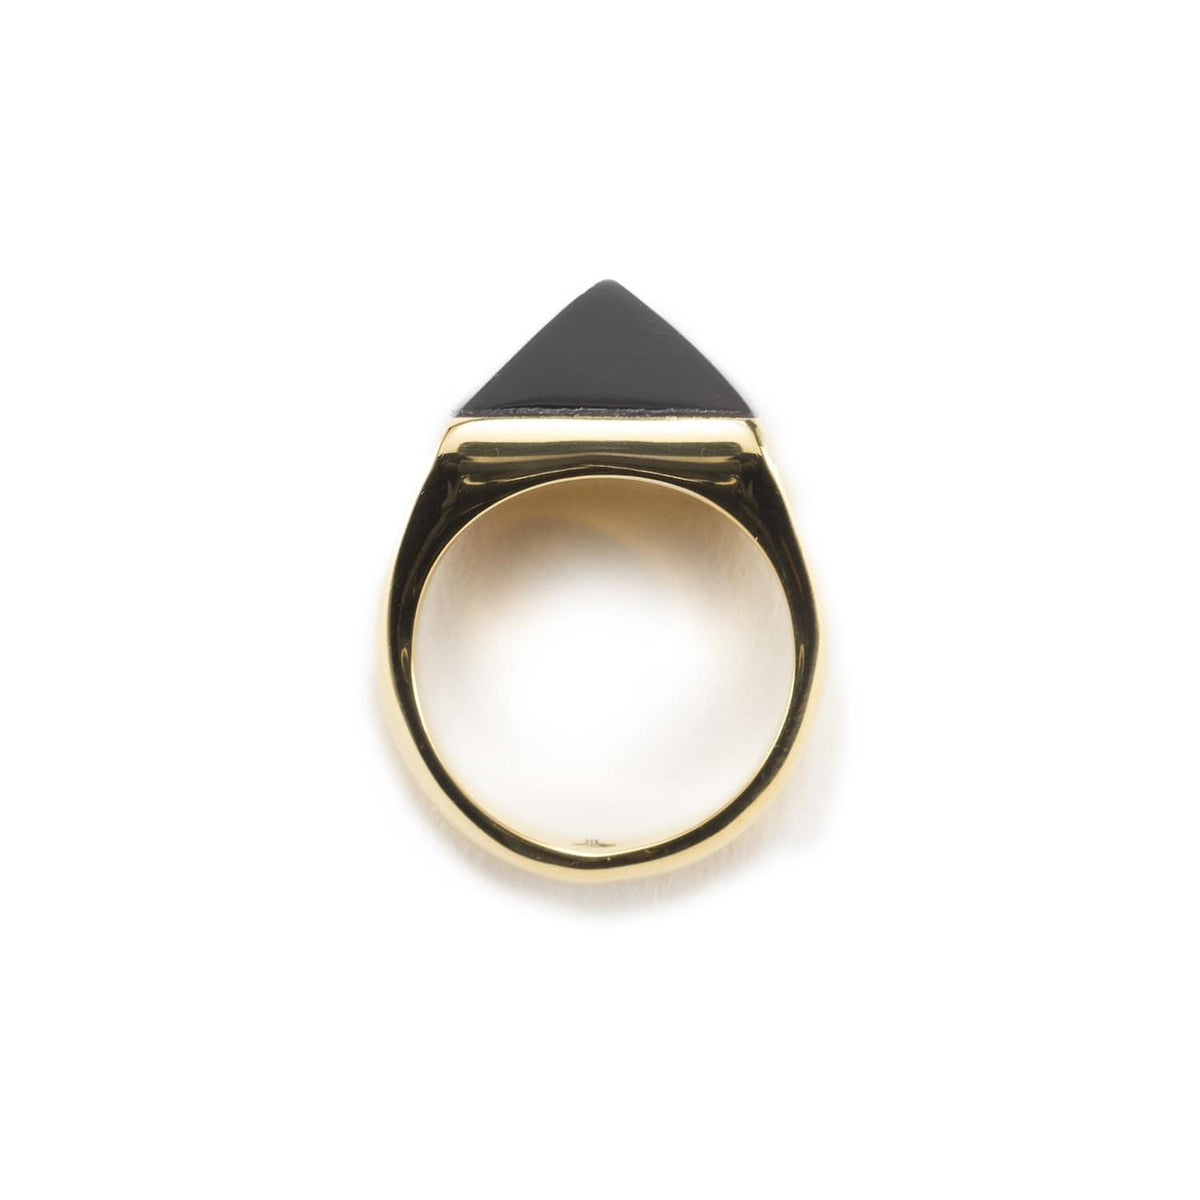 Minimal gold plated ring handmade with a black pyramid shape on top